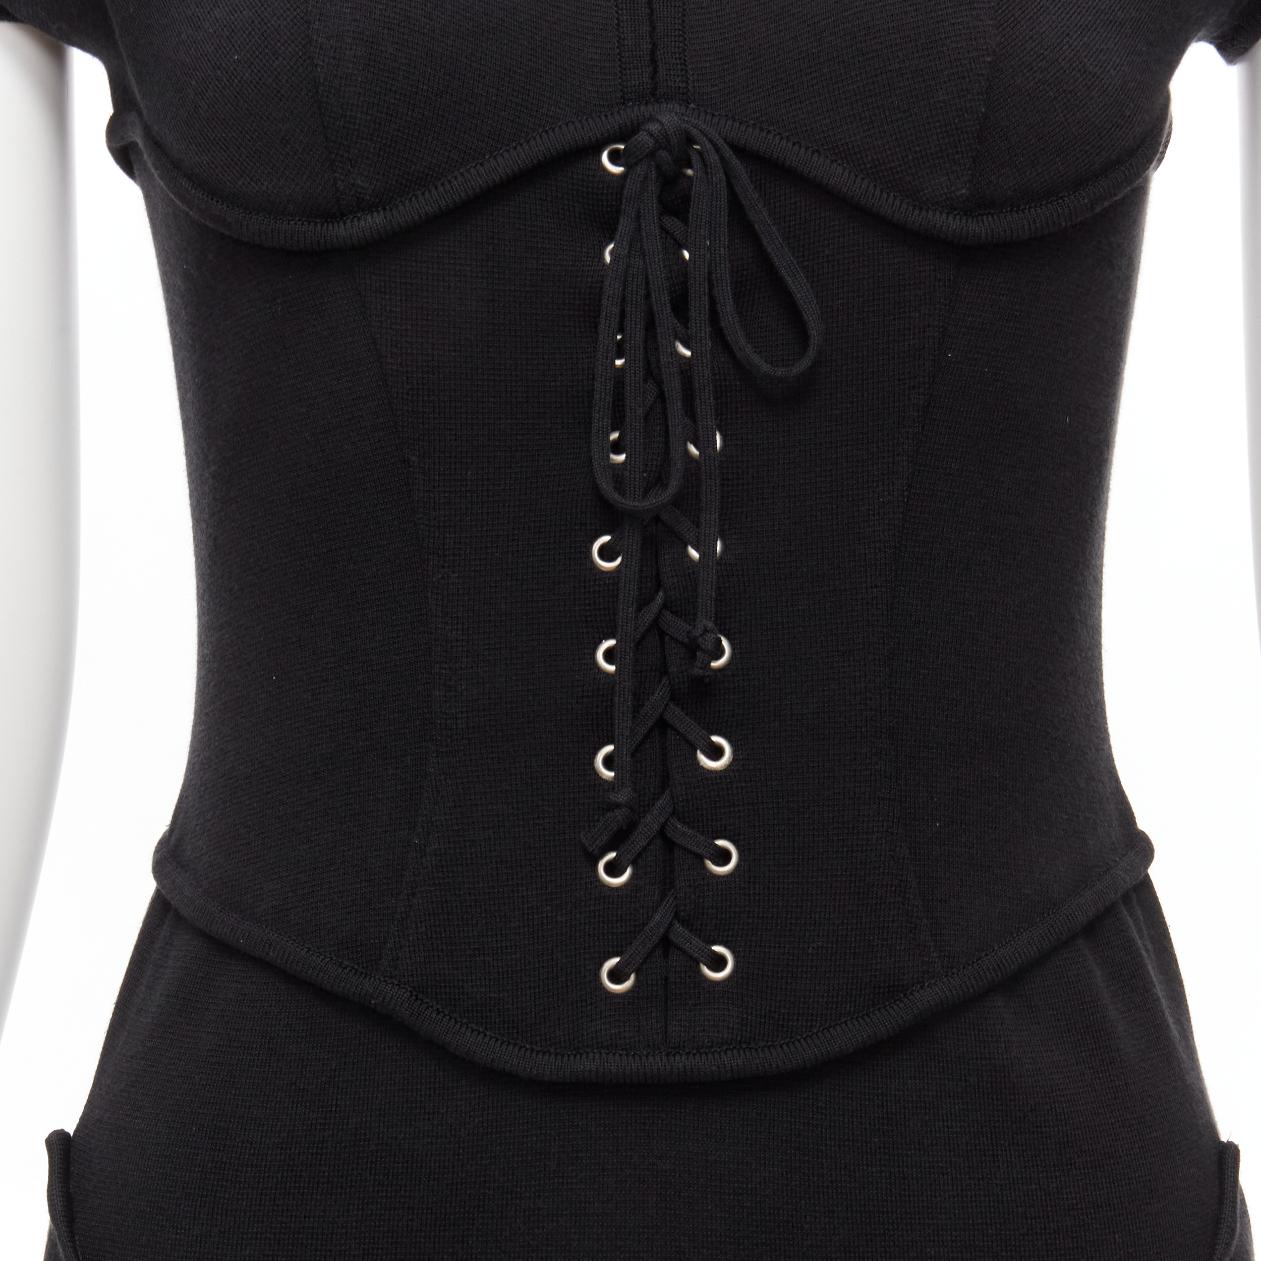 THIERRY MUGLER Vintage black jersey corset lace up waist bodycon dress M
Reference: TGAS/D00359
Brand: Thierry Mugler
Designer: Thierry Mugler
Material: Jersey
Color: Black
Pattern: Solid
Closure: Zip
Extra Details: Back zip detail. With vintage